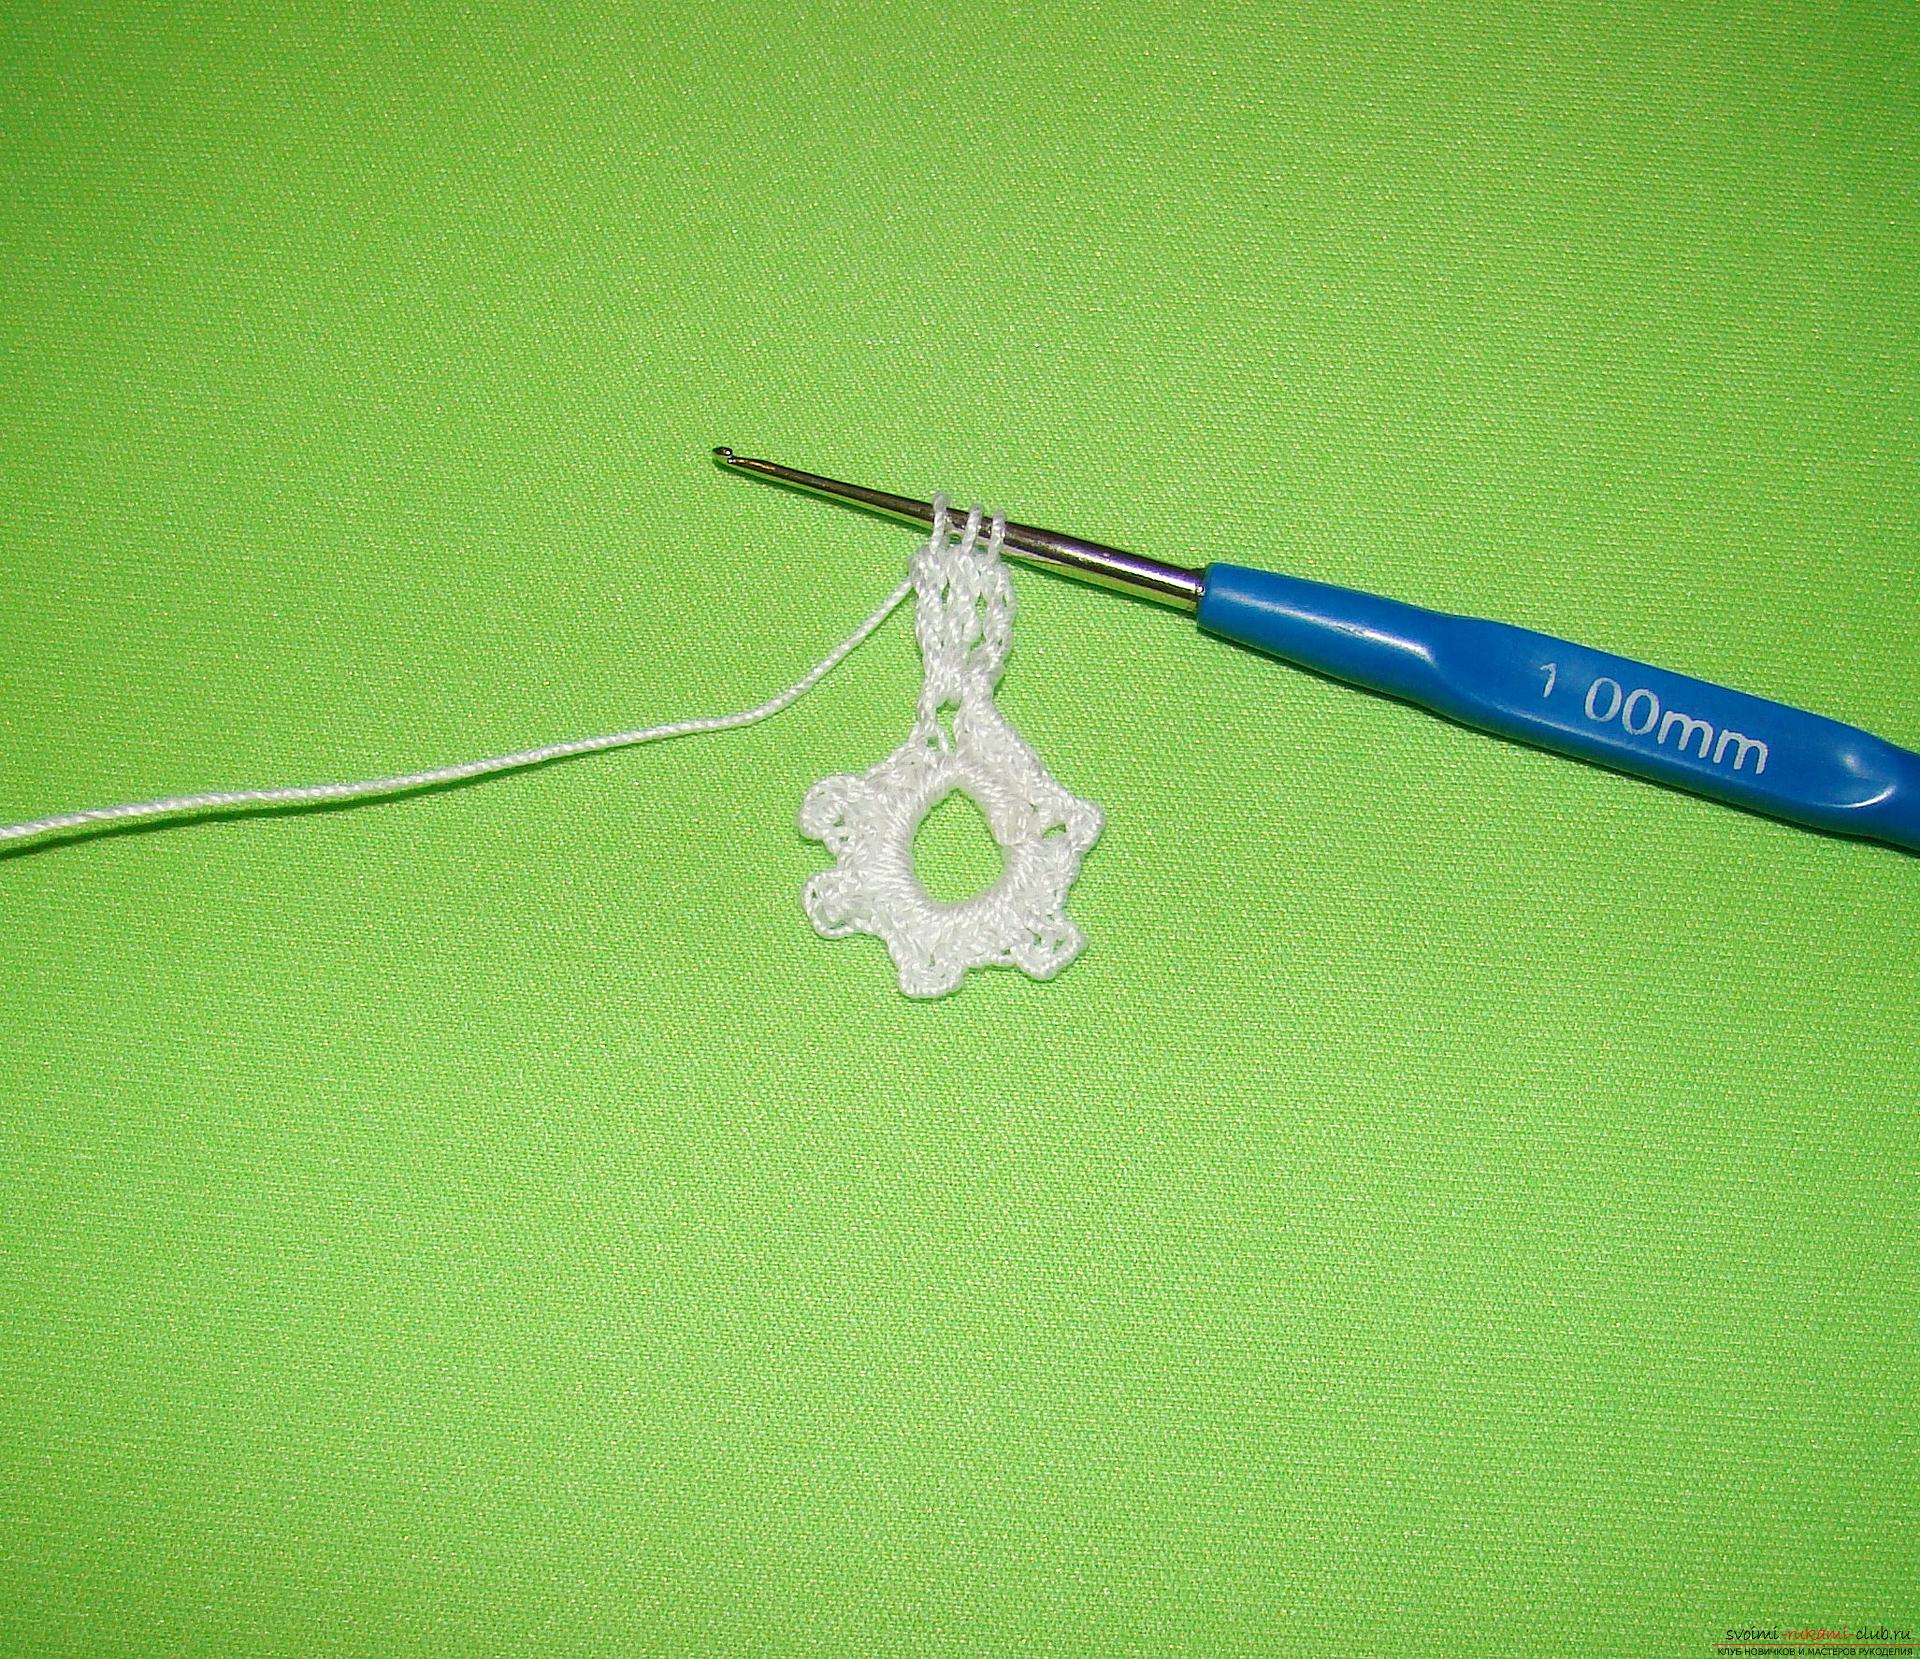 A master class with a photo and diagram will teach you how to tie snowflakes to a Christmas tree crochet. Photo # 2